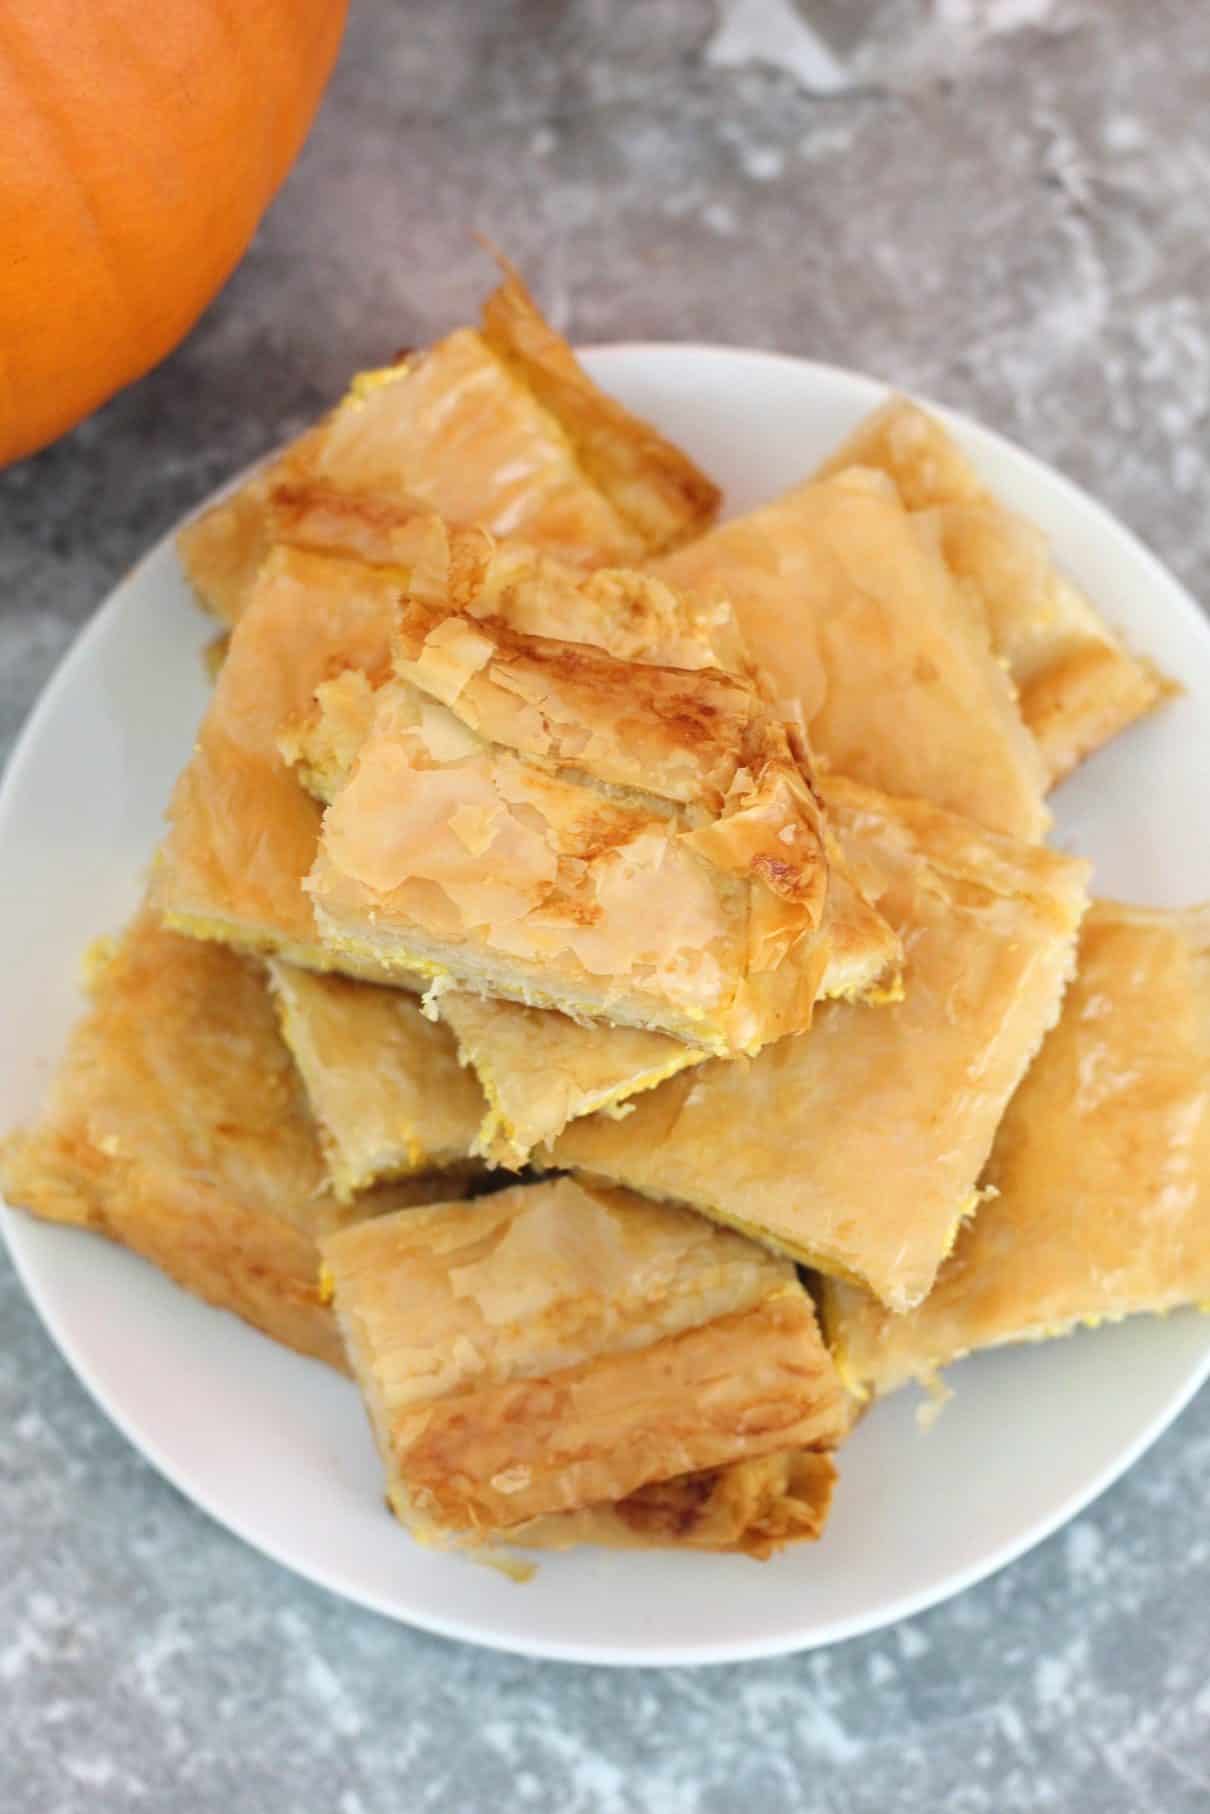 A plate full of slices of byrek, a phyllo pumpkin pie. In the background you can see a little bit of a pumpkin.